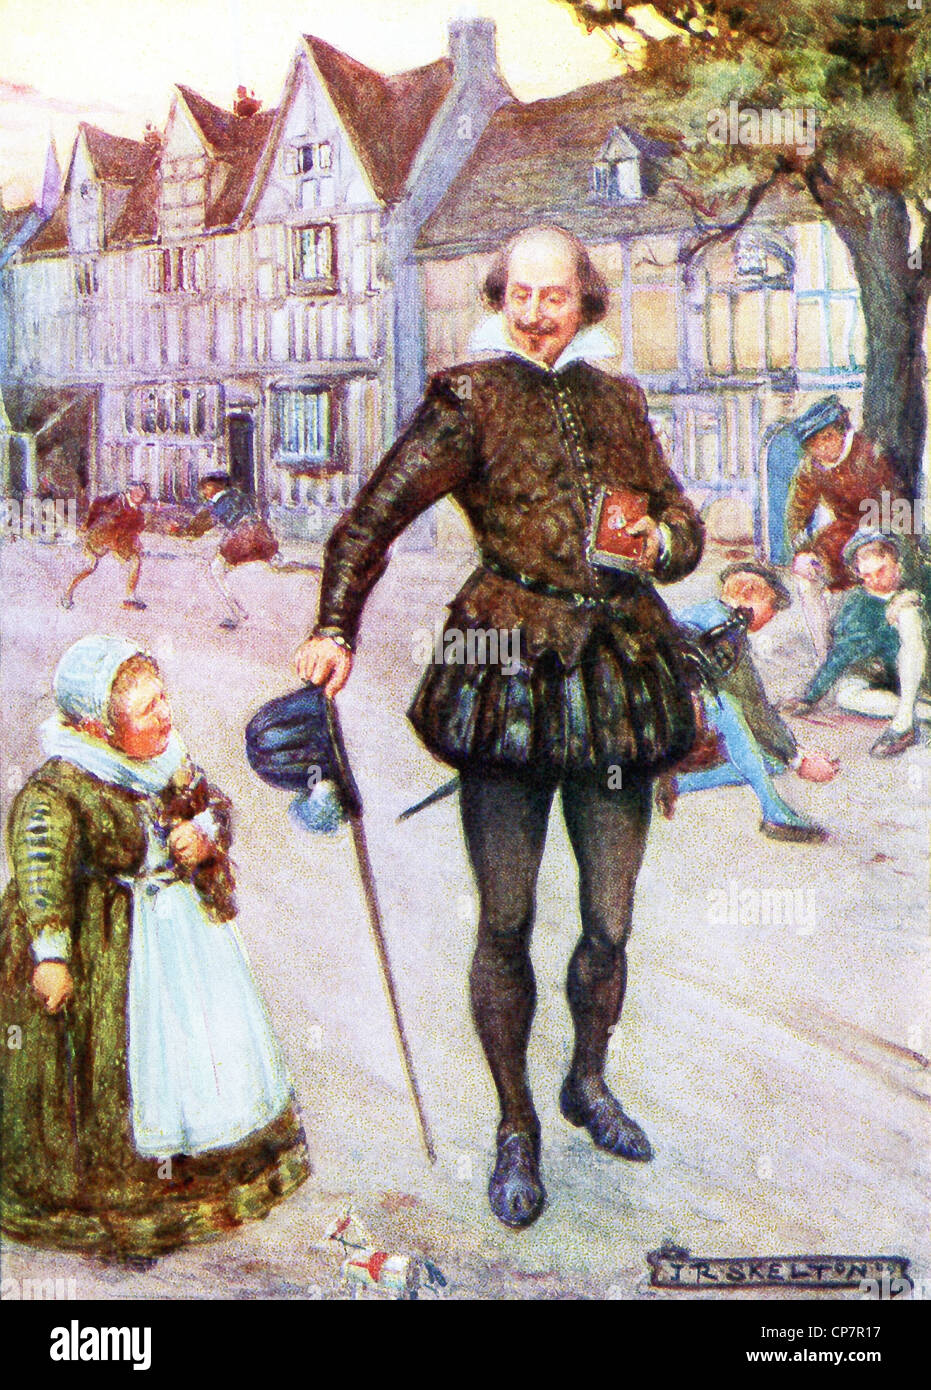 William Shakespeare (died 1616), an English poet and playwright, walks along a street in Stratford upon Avon. Stock Photo